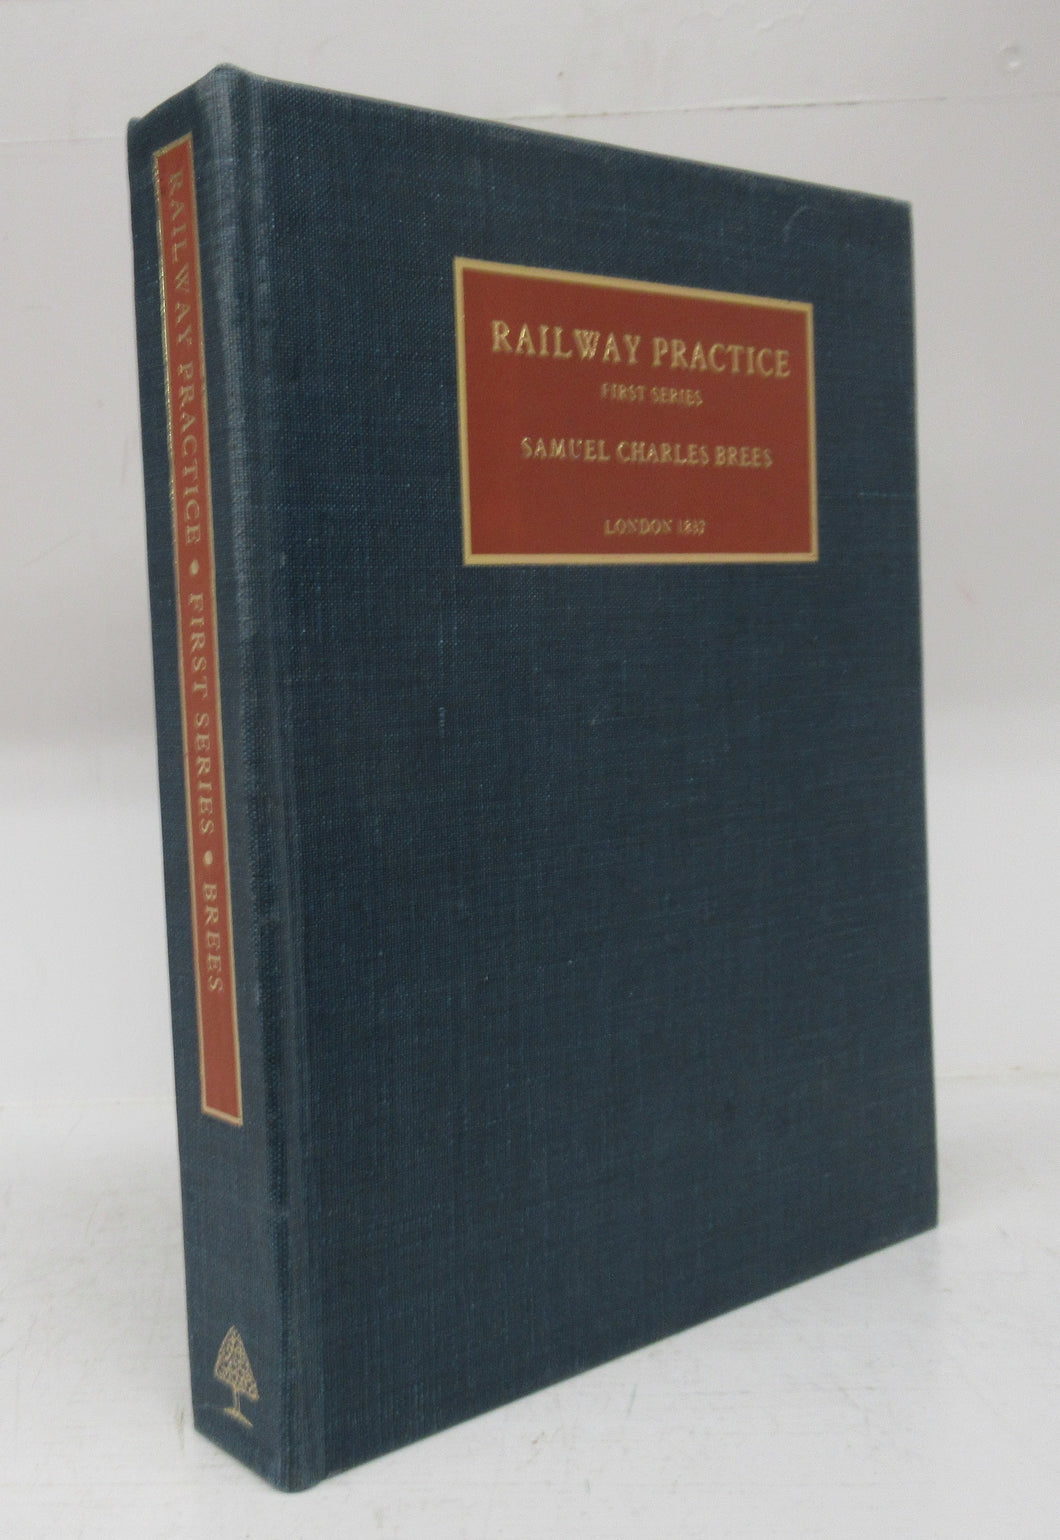 Railway Practice. First Series. A Reproduction of the Copy in the British Library